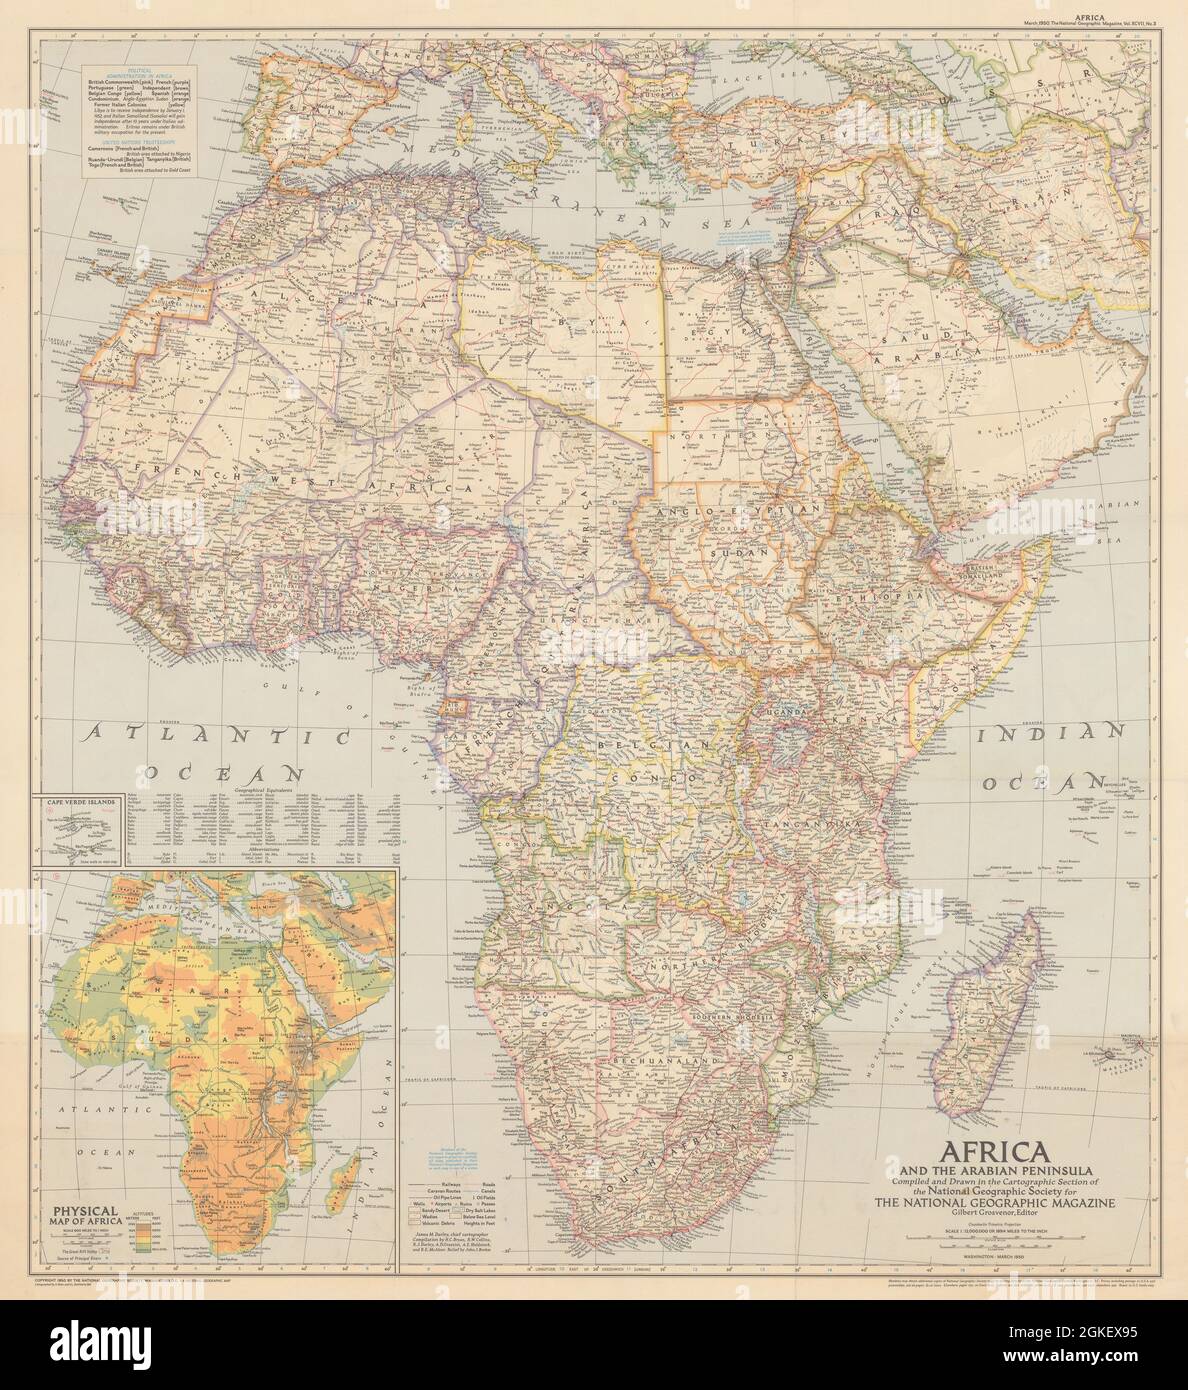 Late colonial Africa & the Arabian Peninsula. National Geographic 1950 old map Stock Photo